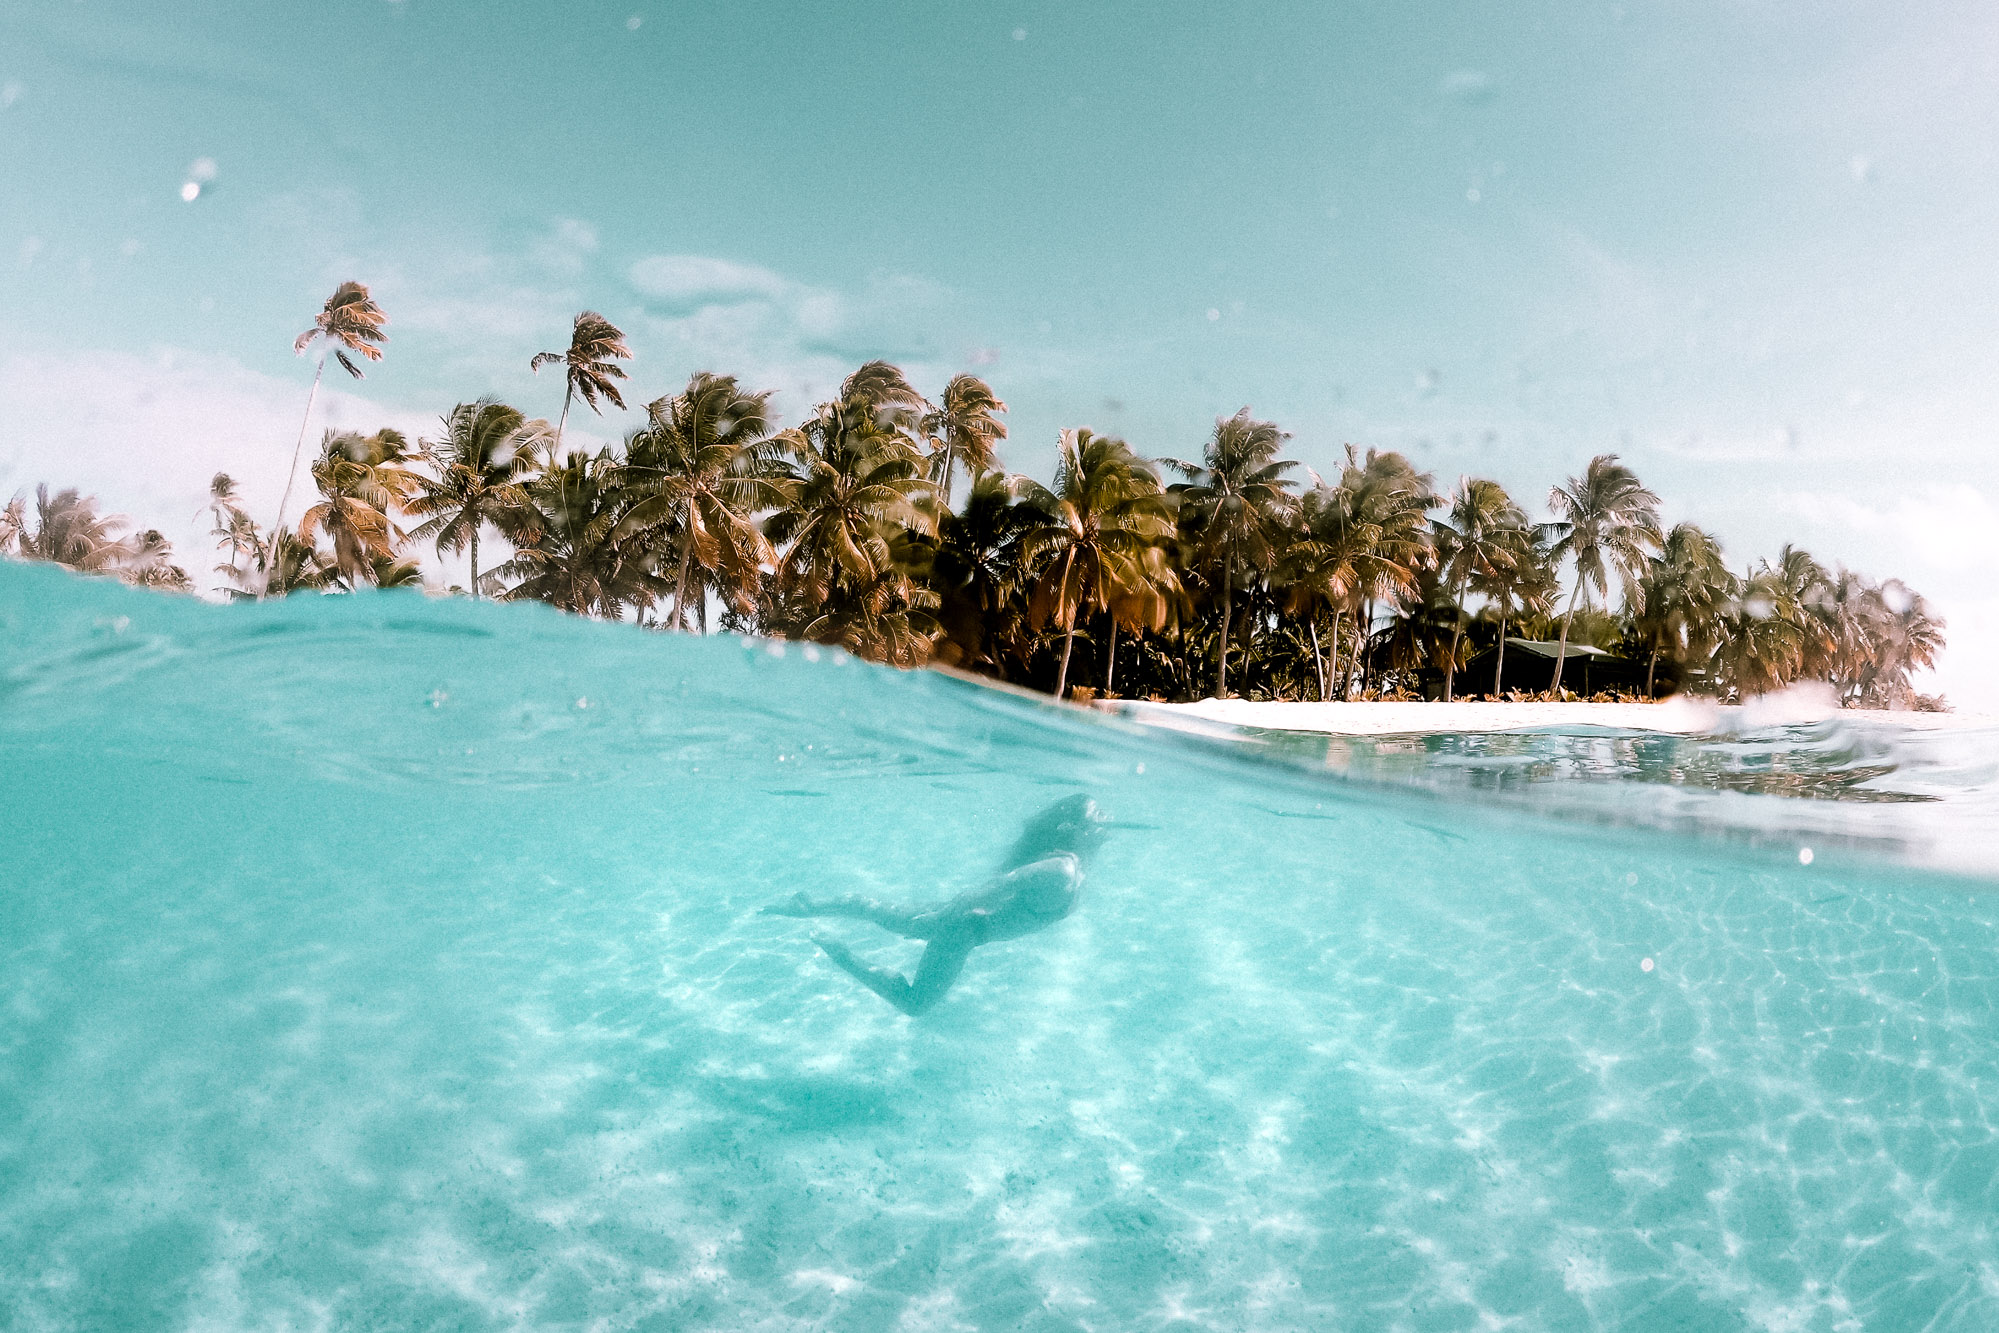 Underwater shot in the turquoise water of One Foot Island, Aitutaki, Cook Islands | Find Us Lost